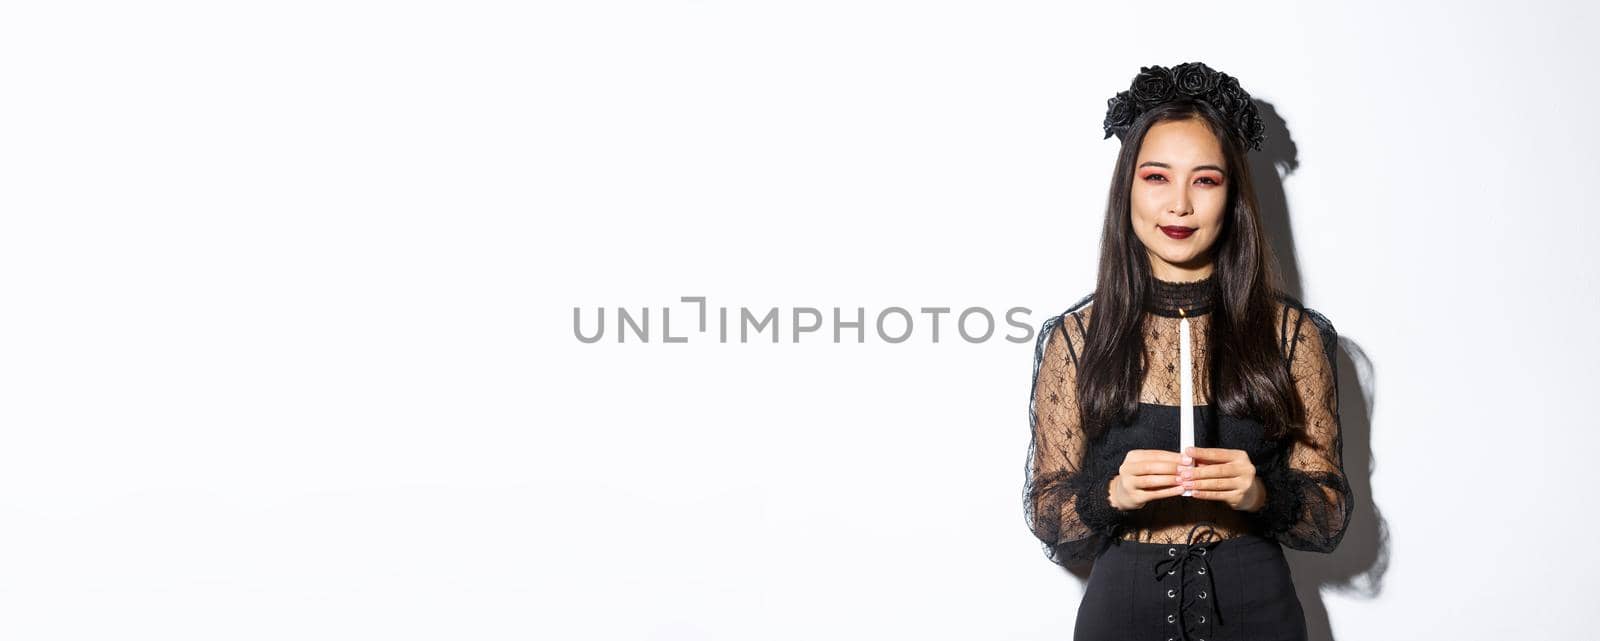 Image of beautiful woman celebrating halloween in witch costume, holding candle and squinting at camera suspicious, standing over white background.